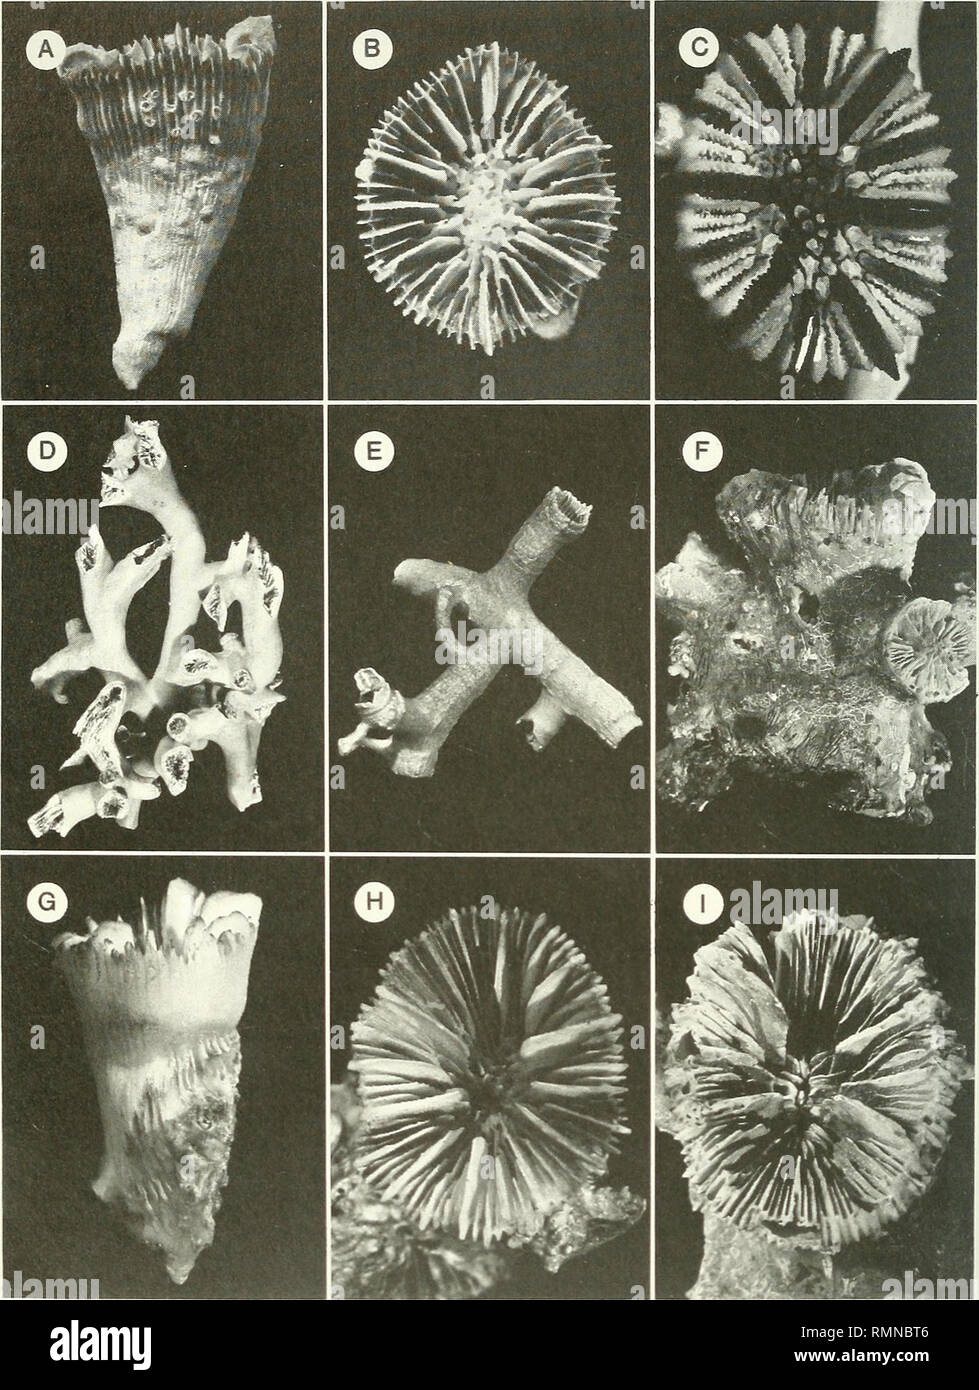 . Annals of the South African Museum = Annale van die Suid-Afrikaanse Museum. Natural history. 252 ANNALS OF THE SOUTH AFRICAN MUSEUM. Fig. 6. A-B. Asterosmilia marchadi, V-2634, IOM, lateral and calicular views. Ax 1,5, B x2,l. C. Dasmosmilia variegata, V-2644, IOM, calice. x4,7. D. Solenosmilia variabilis, MN-SM162, USNM 91690, partial colony, x 0,7. E. Goniocorella dumosa, MN-SM174, USNM 77221. x 1,6. F-I. Rhizosmilia robusta sp. nov. F, I. AB-373B (holotype), lateral and calicular views. Fx0,9, 1x1,5. G. MN-ZD7, USNM 91686, paratype illustrating exothecal roots. x2,5. H. MN-ZD5, USNM 91685 Stock Photo